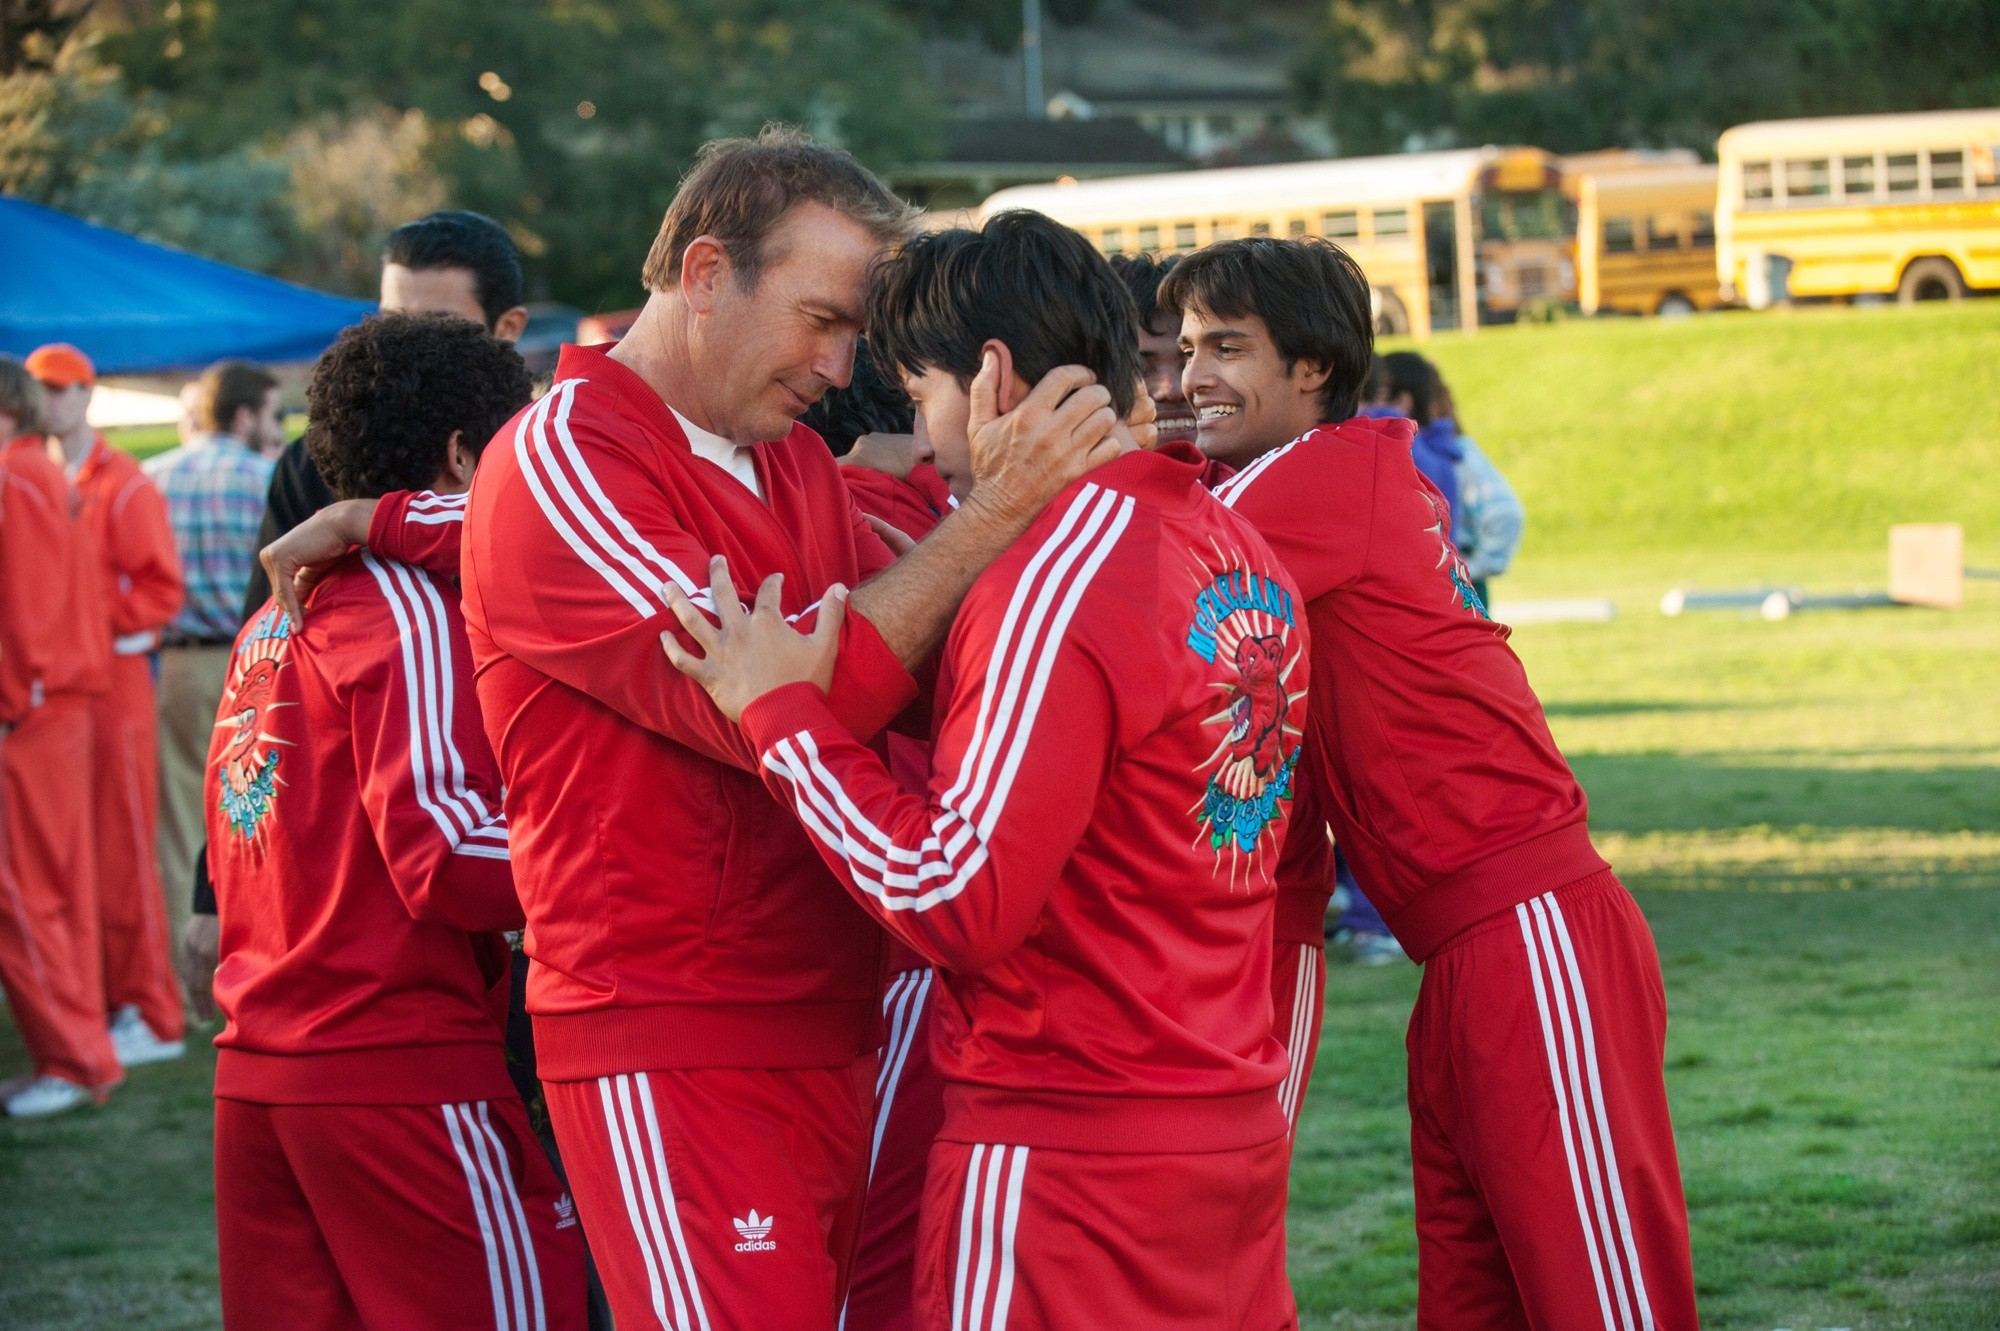 Kevin Costner stars as Jim White and Carlos Pratts stars as Thomas in Walt Disney Pictures' McFarland, USA (2015)